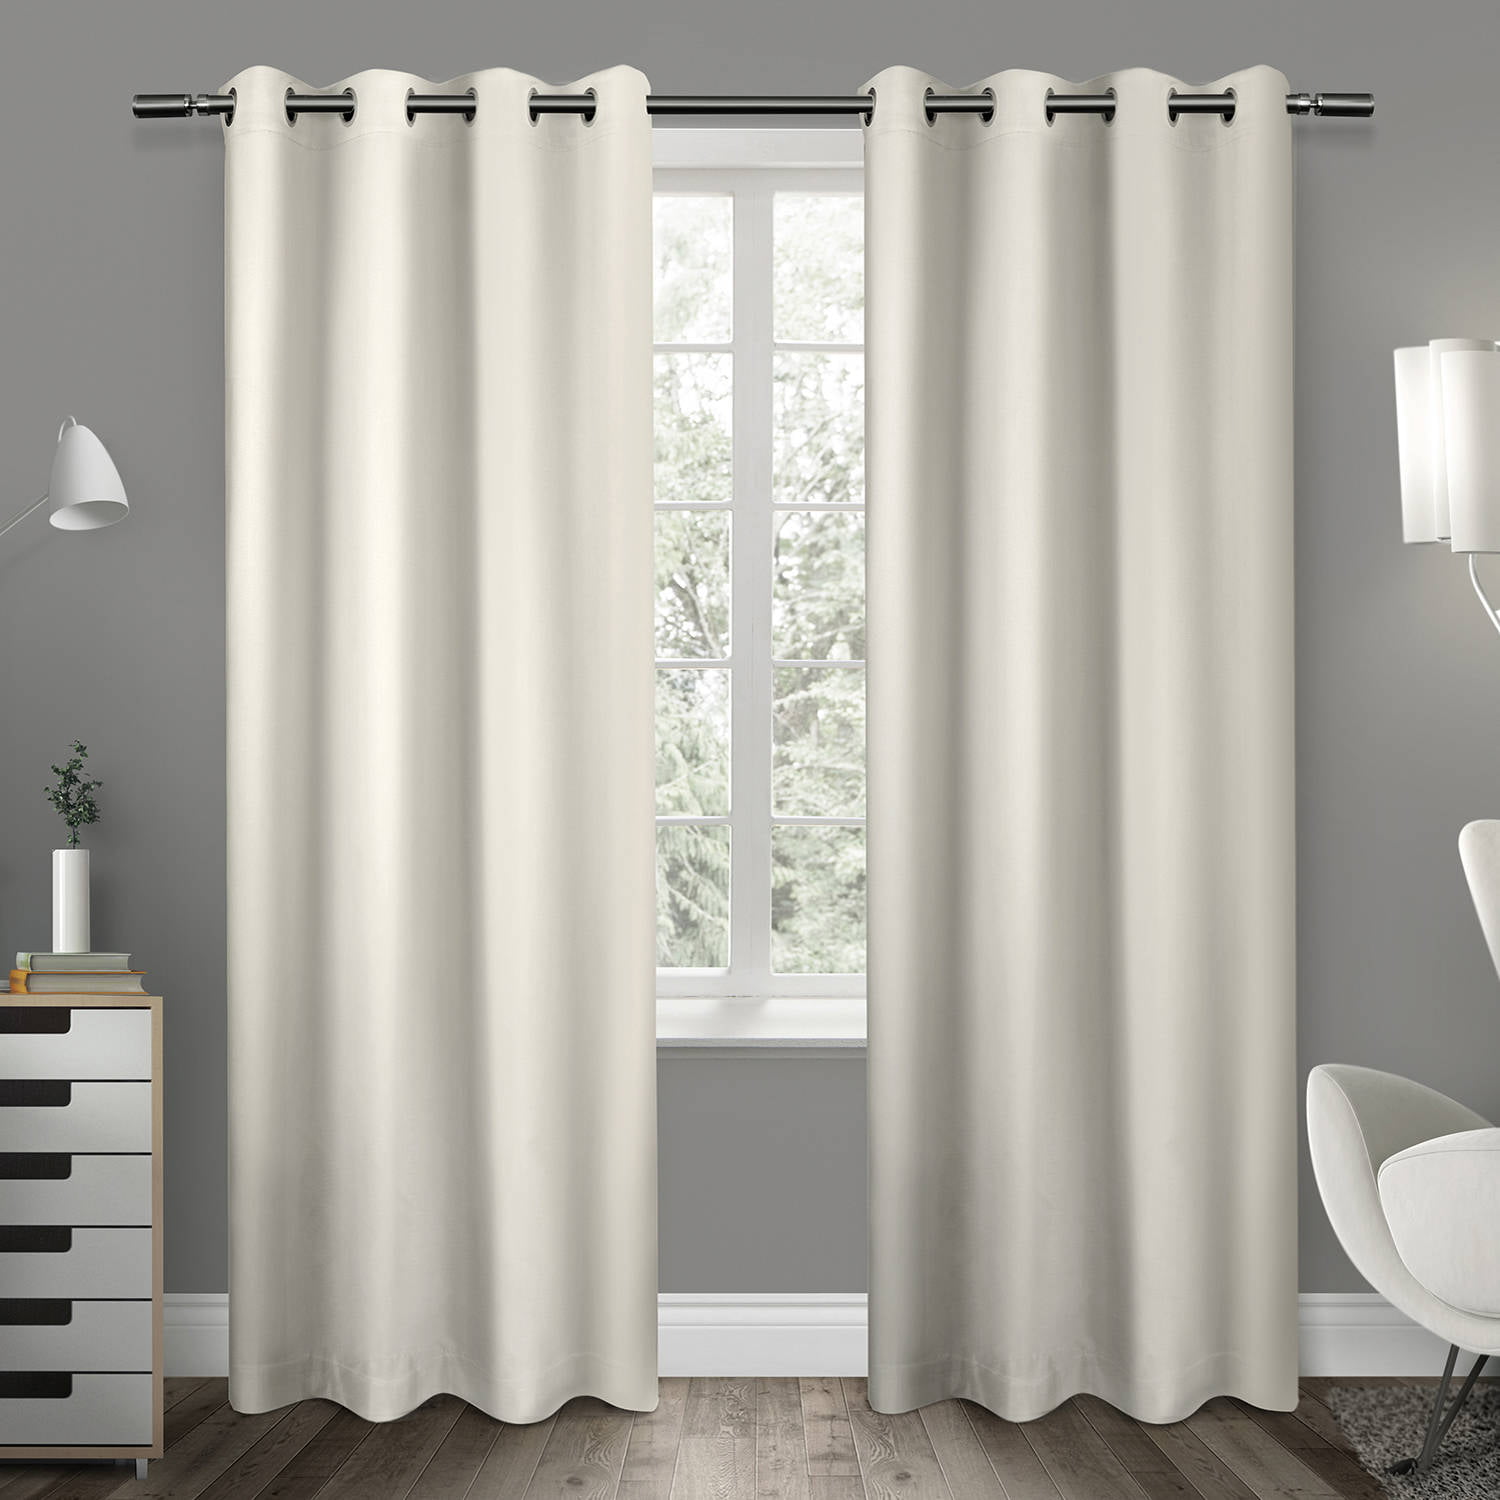 2 Count Exclusive Home Curtains Sateen GT Twill Woven Room Darkening Blackout Grommet Top Curtain Panel Pair Chili 52x84